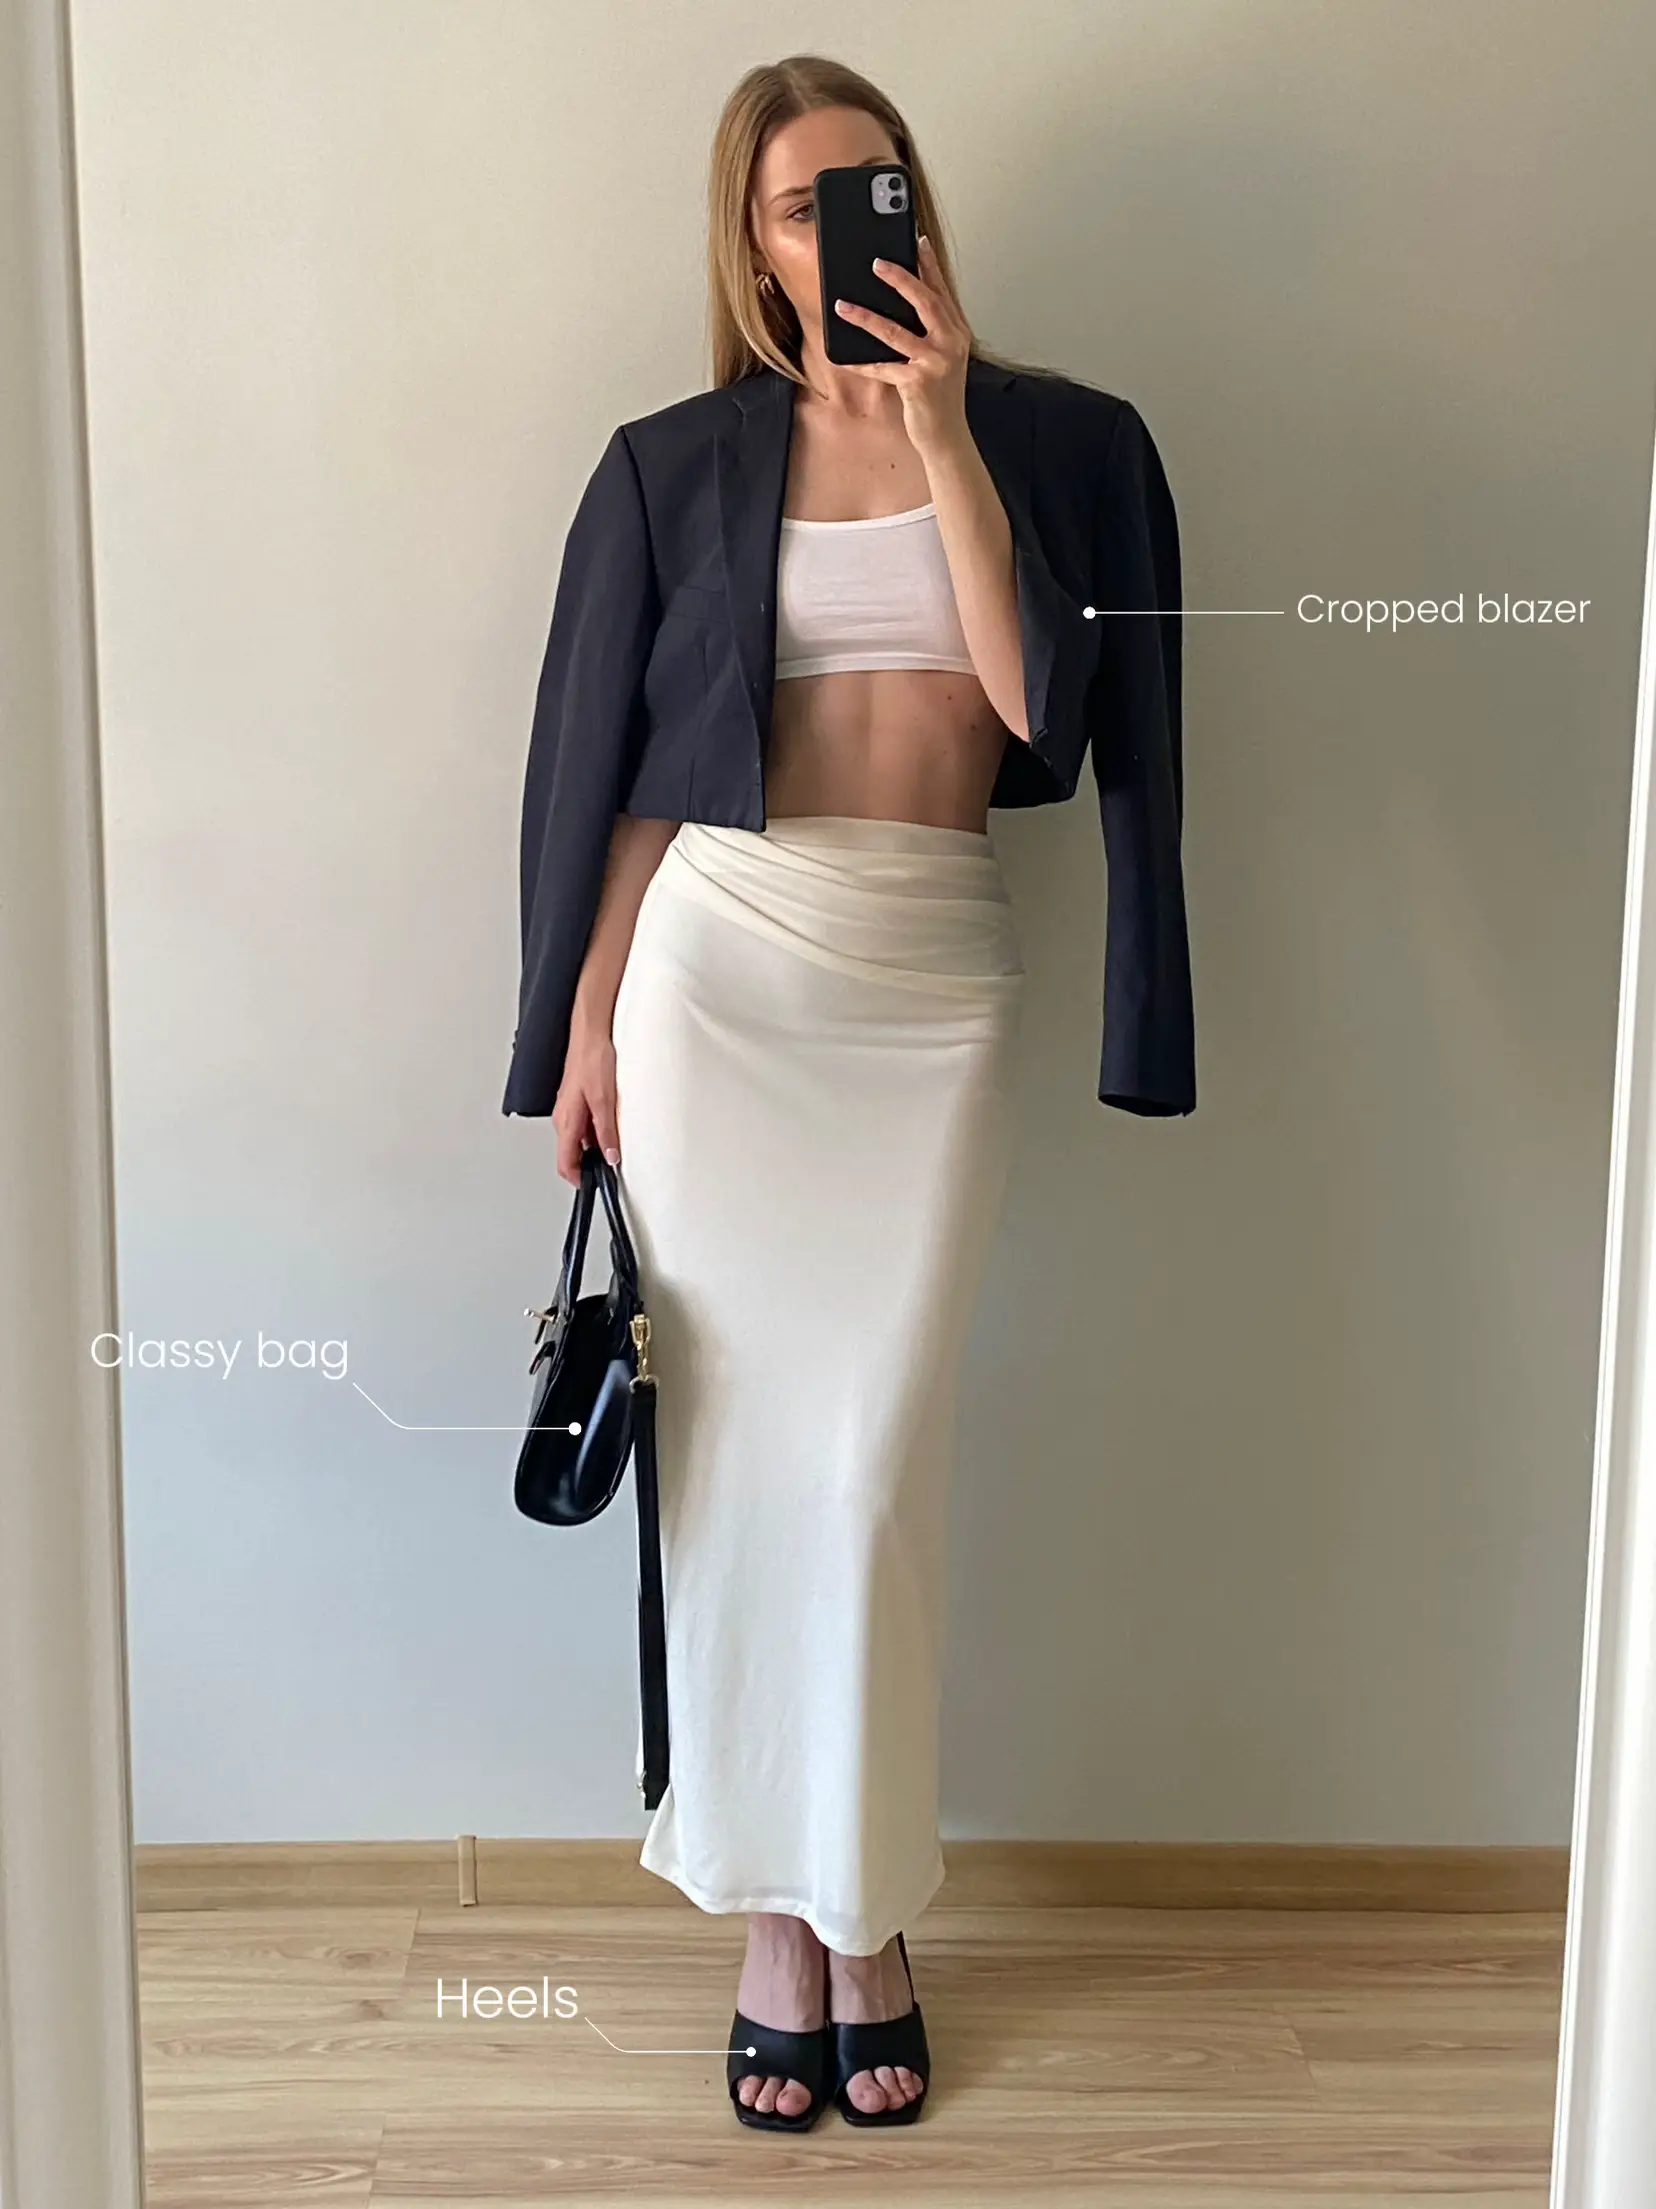 NIGHT OUT OUTFITS FOR CLASSY GIRL, Gallery posted by Kornelia